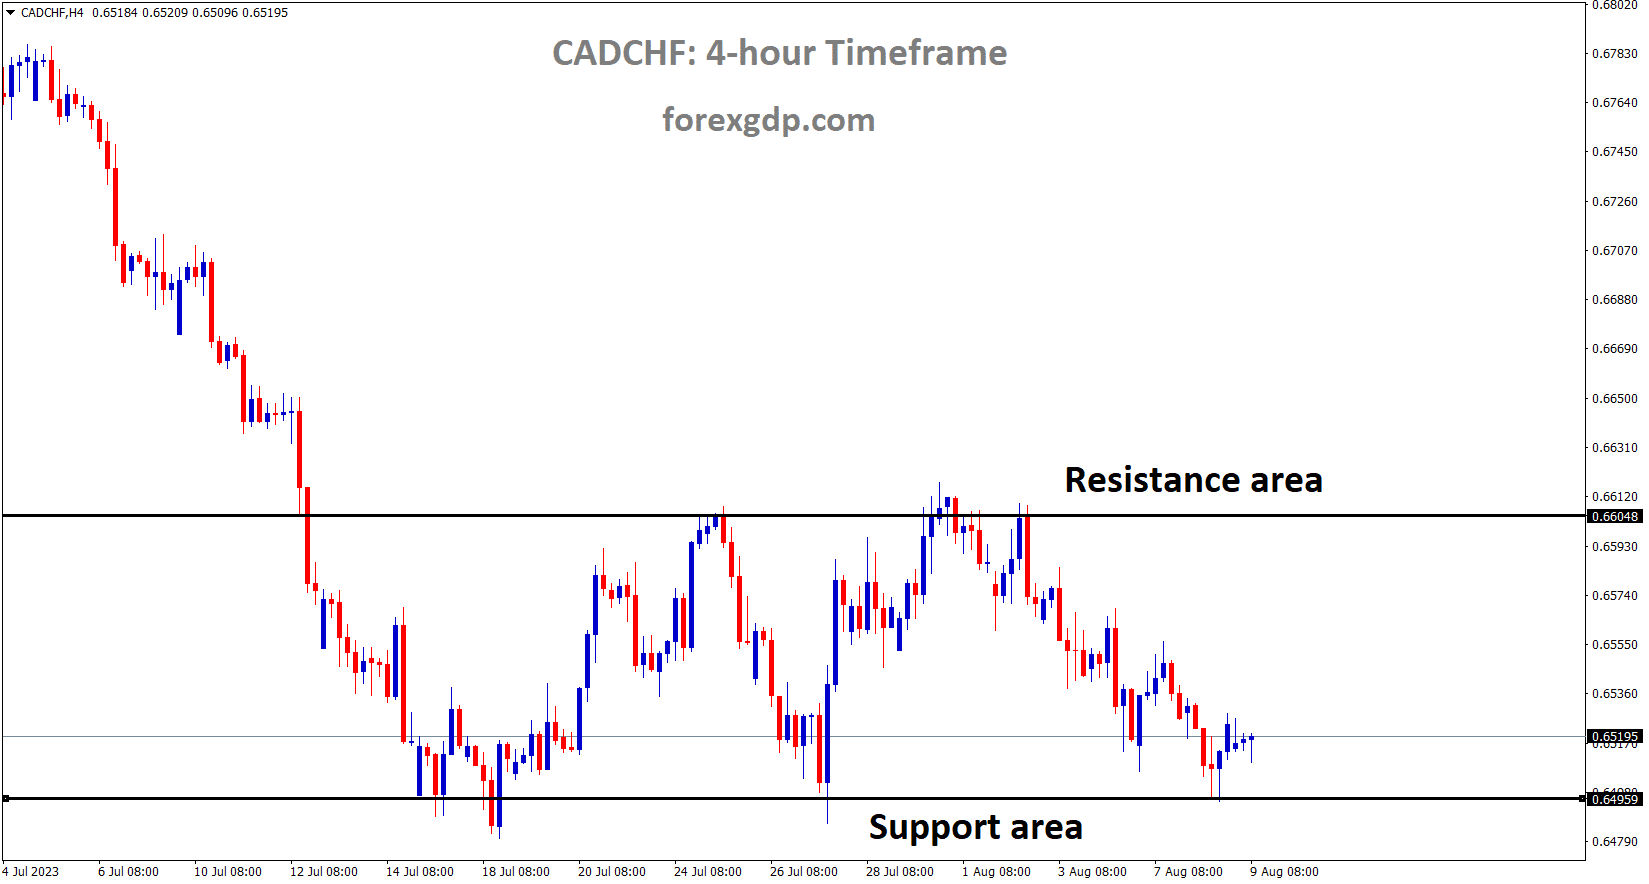 CADCHF is moving in the Box pattern and the market has reached the horizontal support area of the pattern